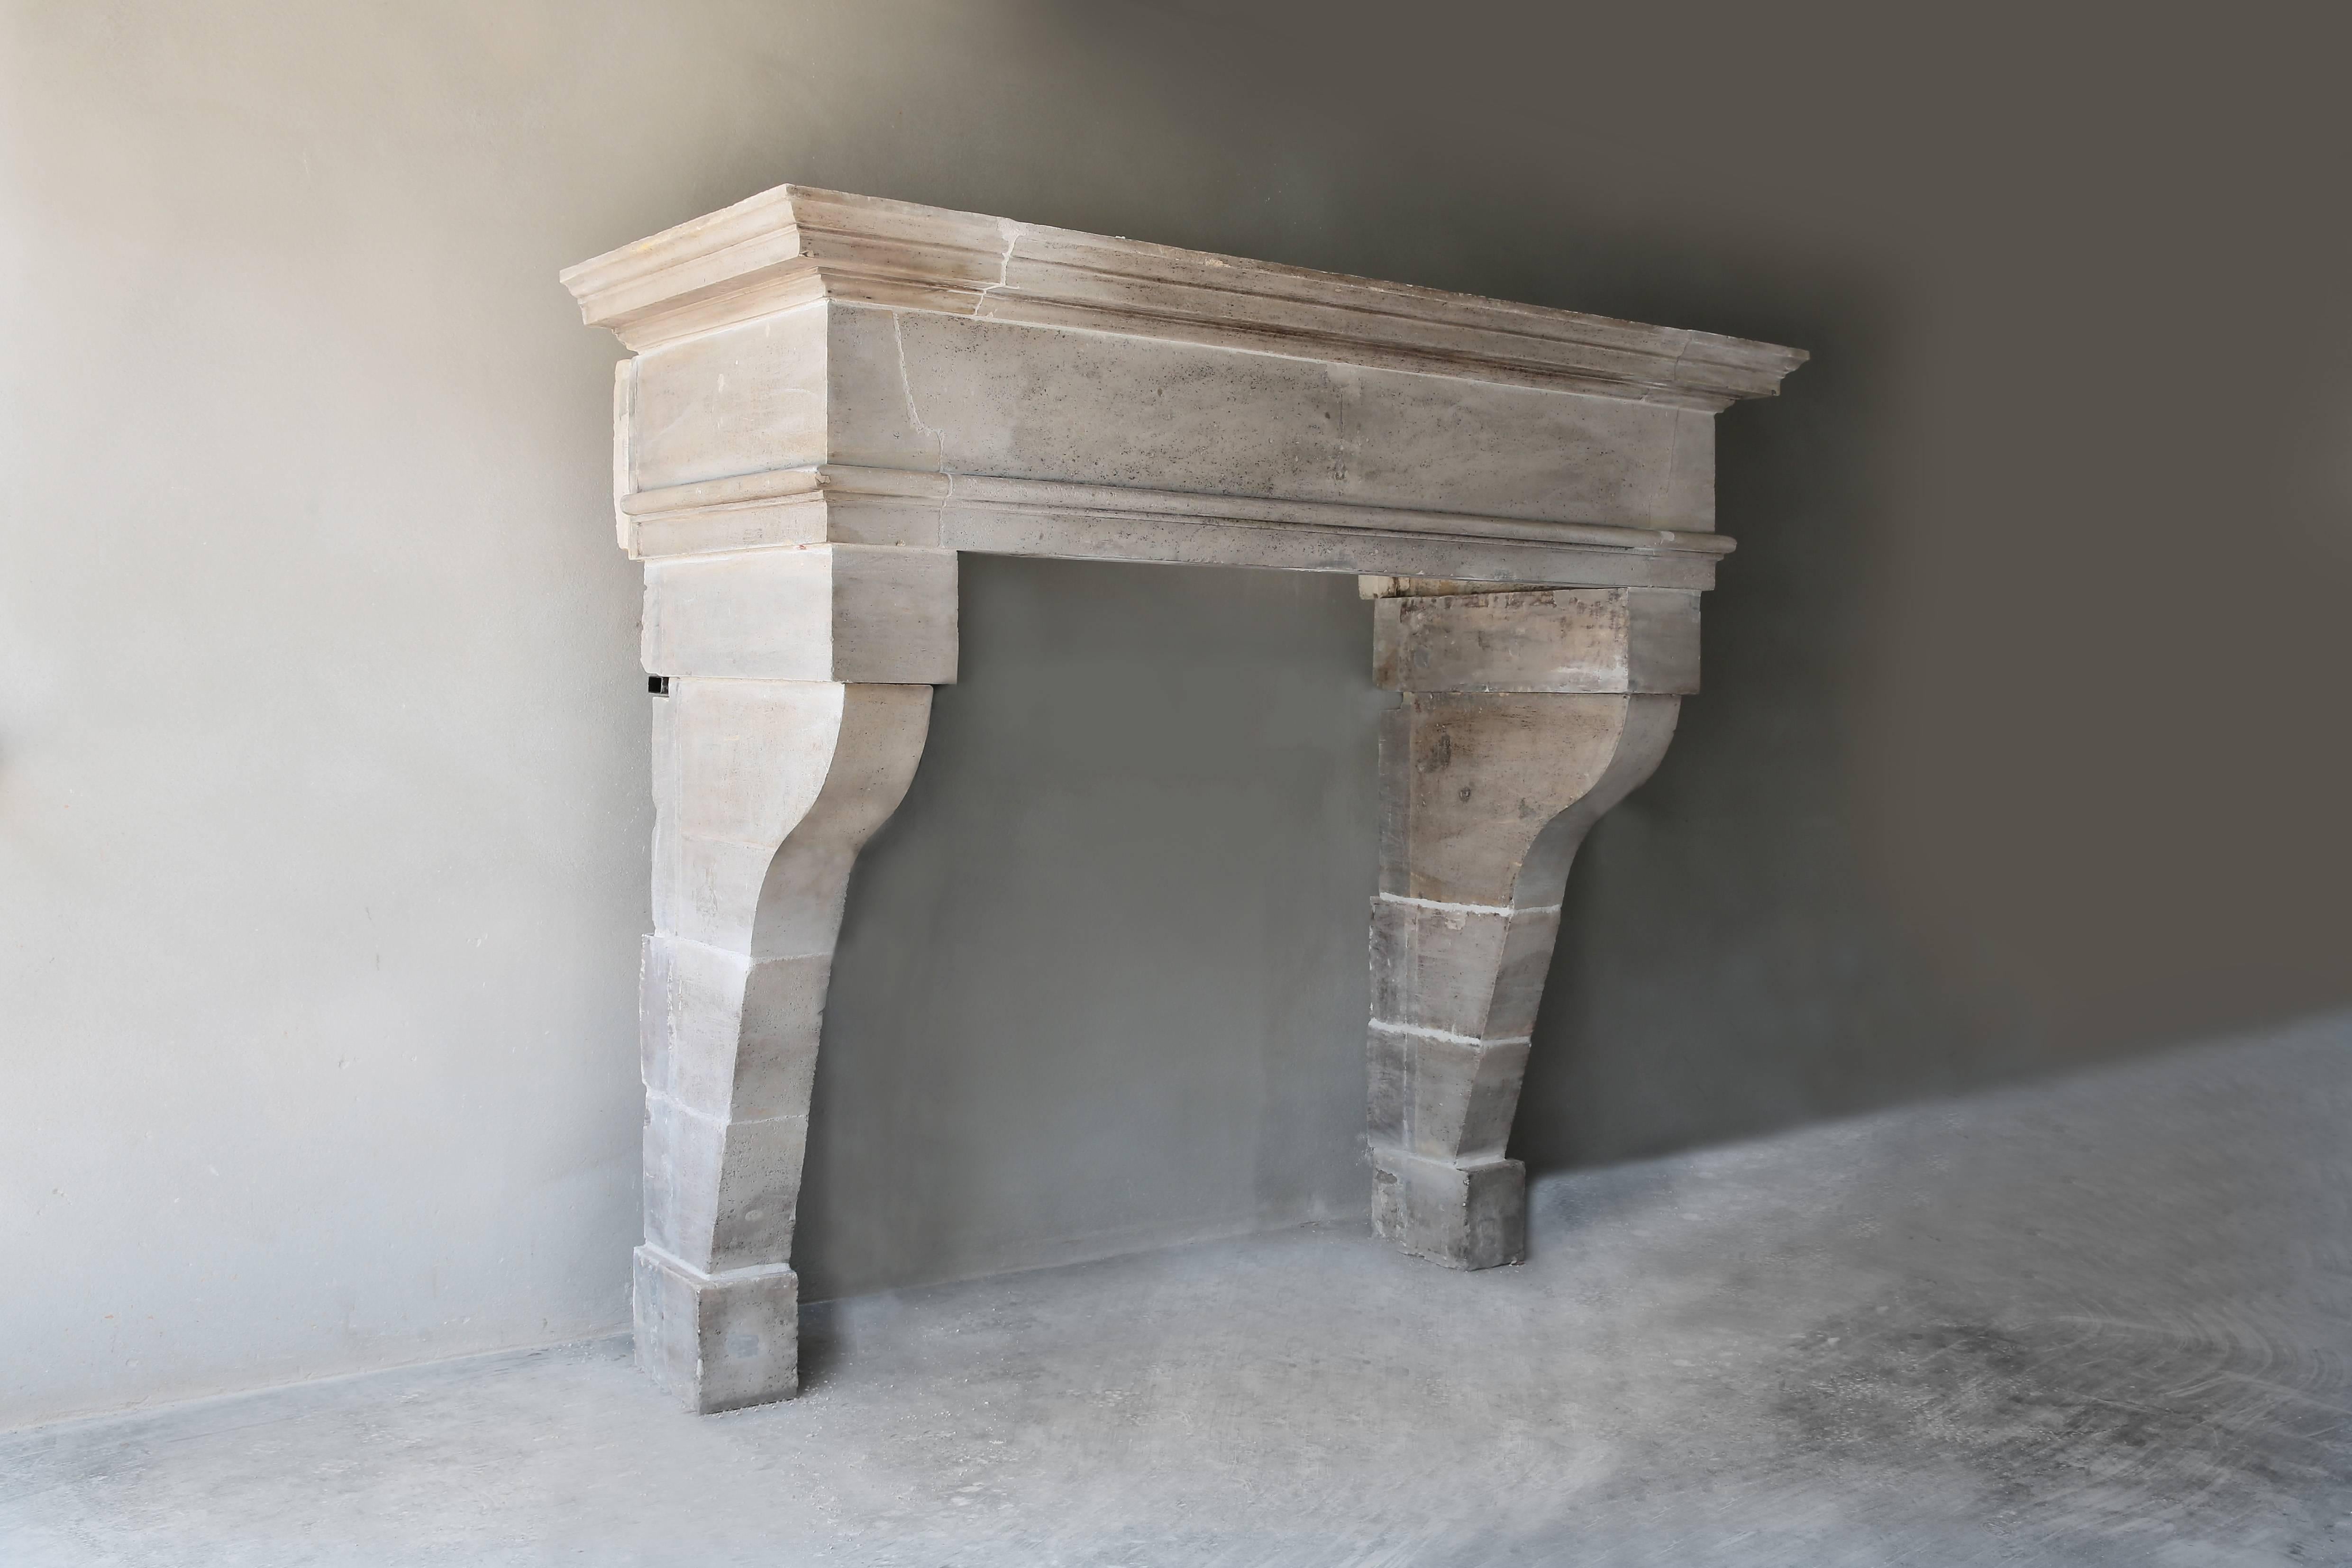 Recently we have found this beautiful robust and sturdy castle fireplace from the middle of France. This Louis XIII fireplace features a view through the wide front section and beautiful molding. The proportions of this antique fireplace are exactly